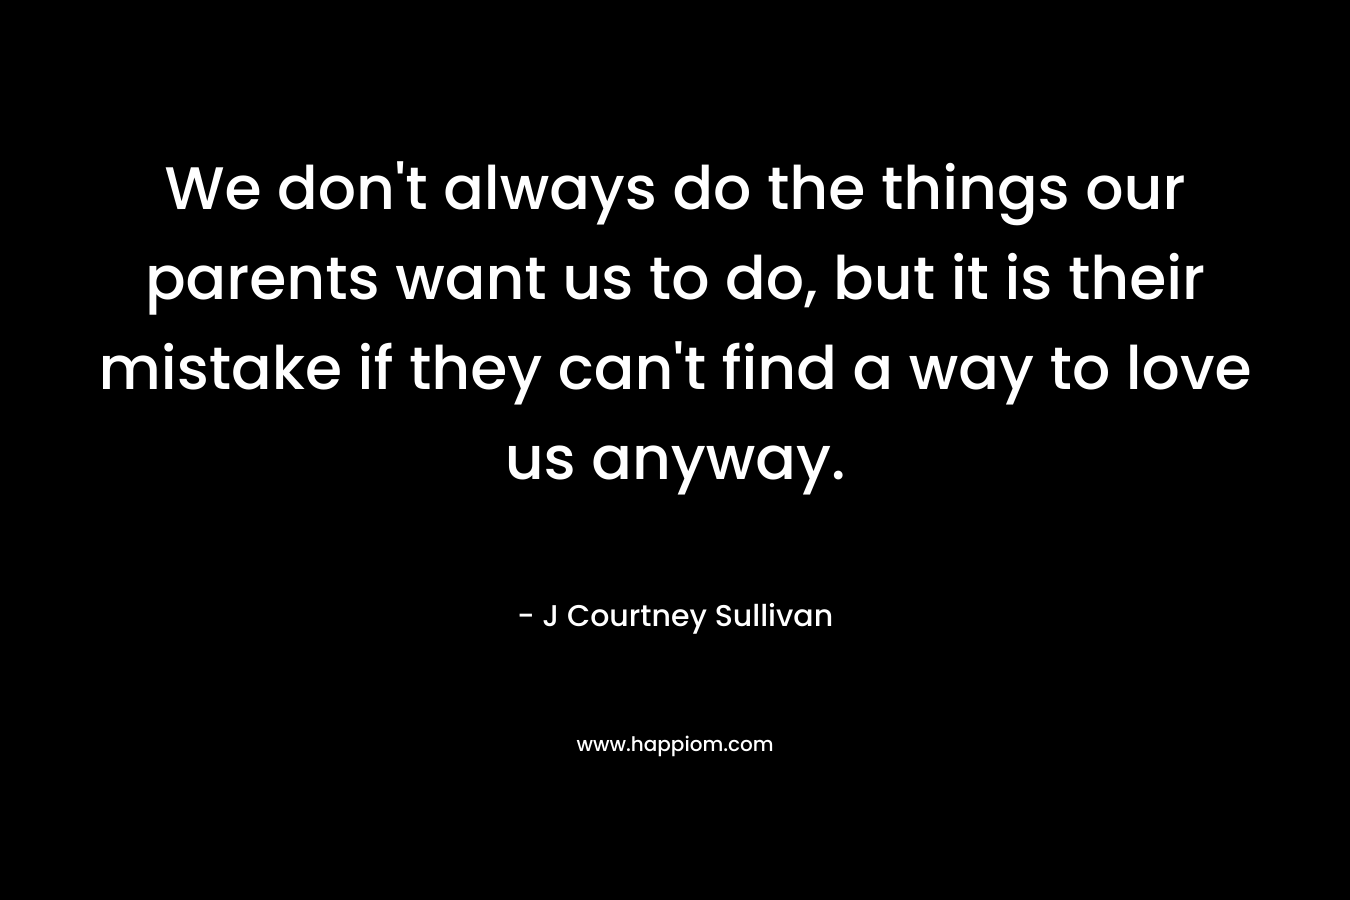 We don’t always do the things our parents want us to do, but it is their mistake if they can’t find a way to love us anyway. – J Courtney Sullivan